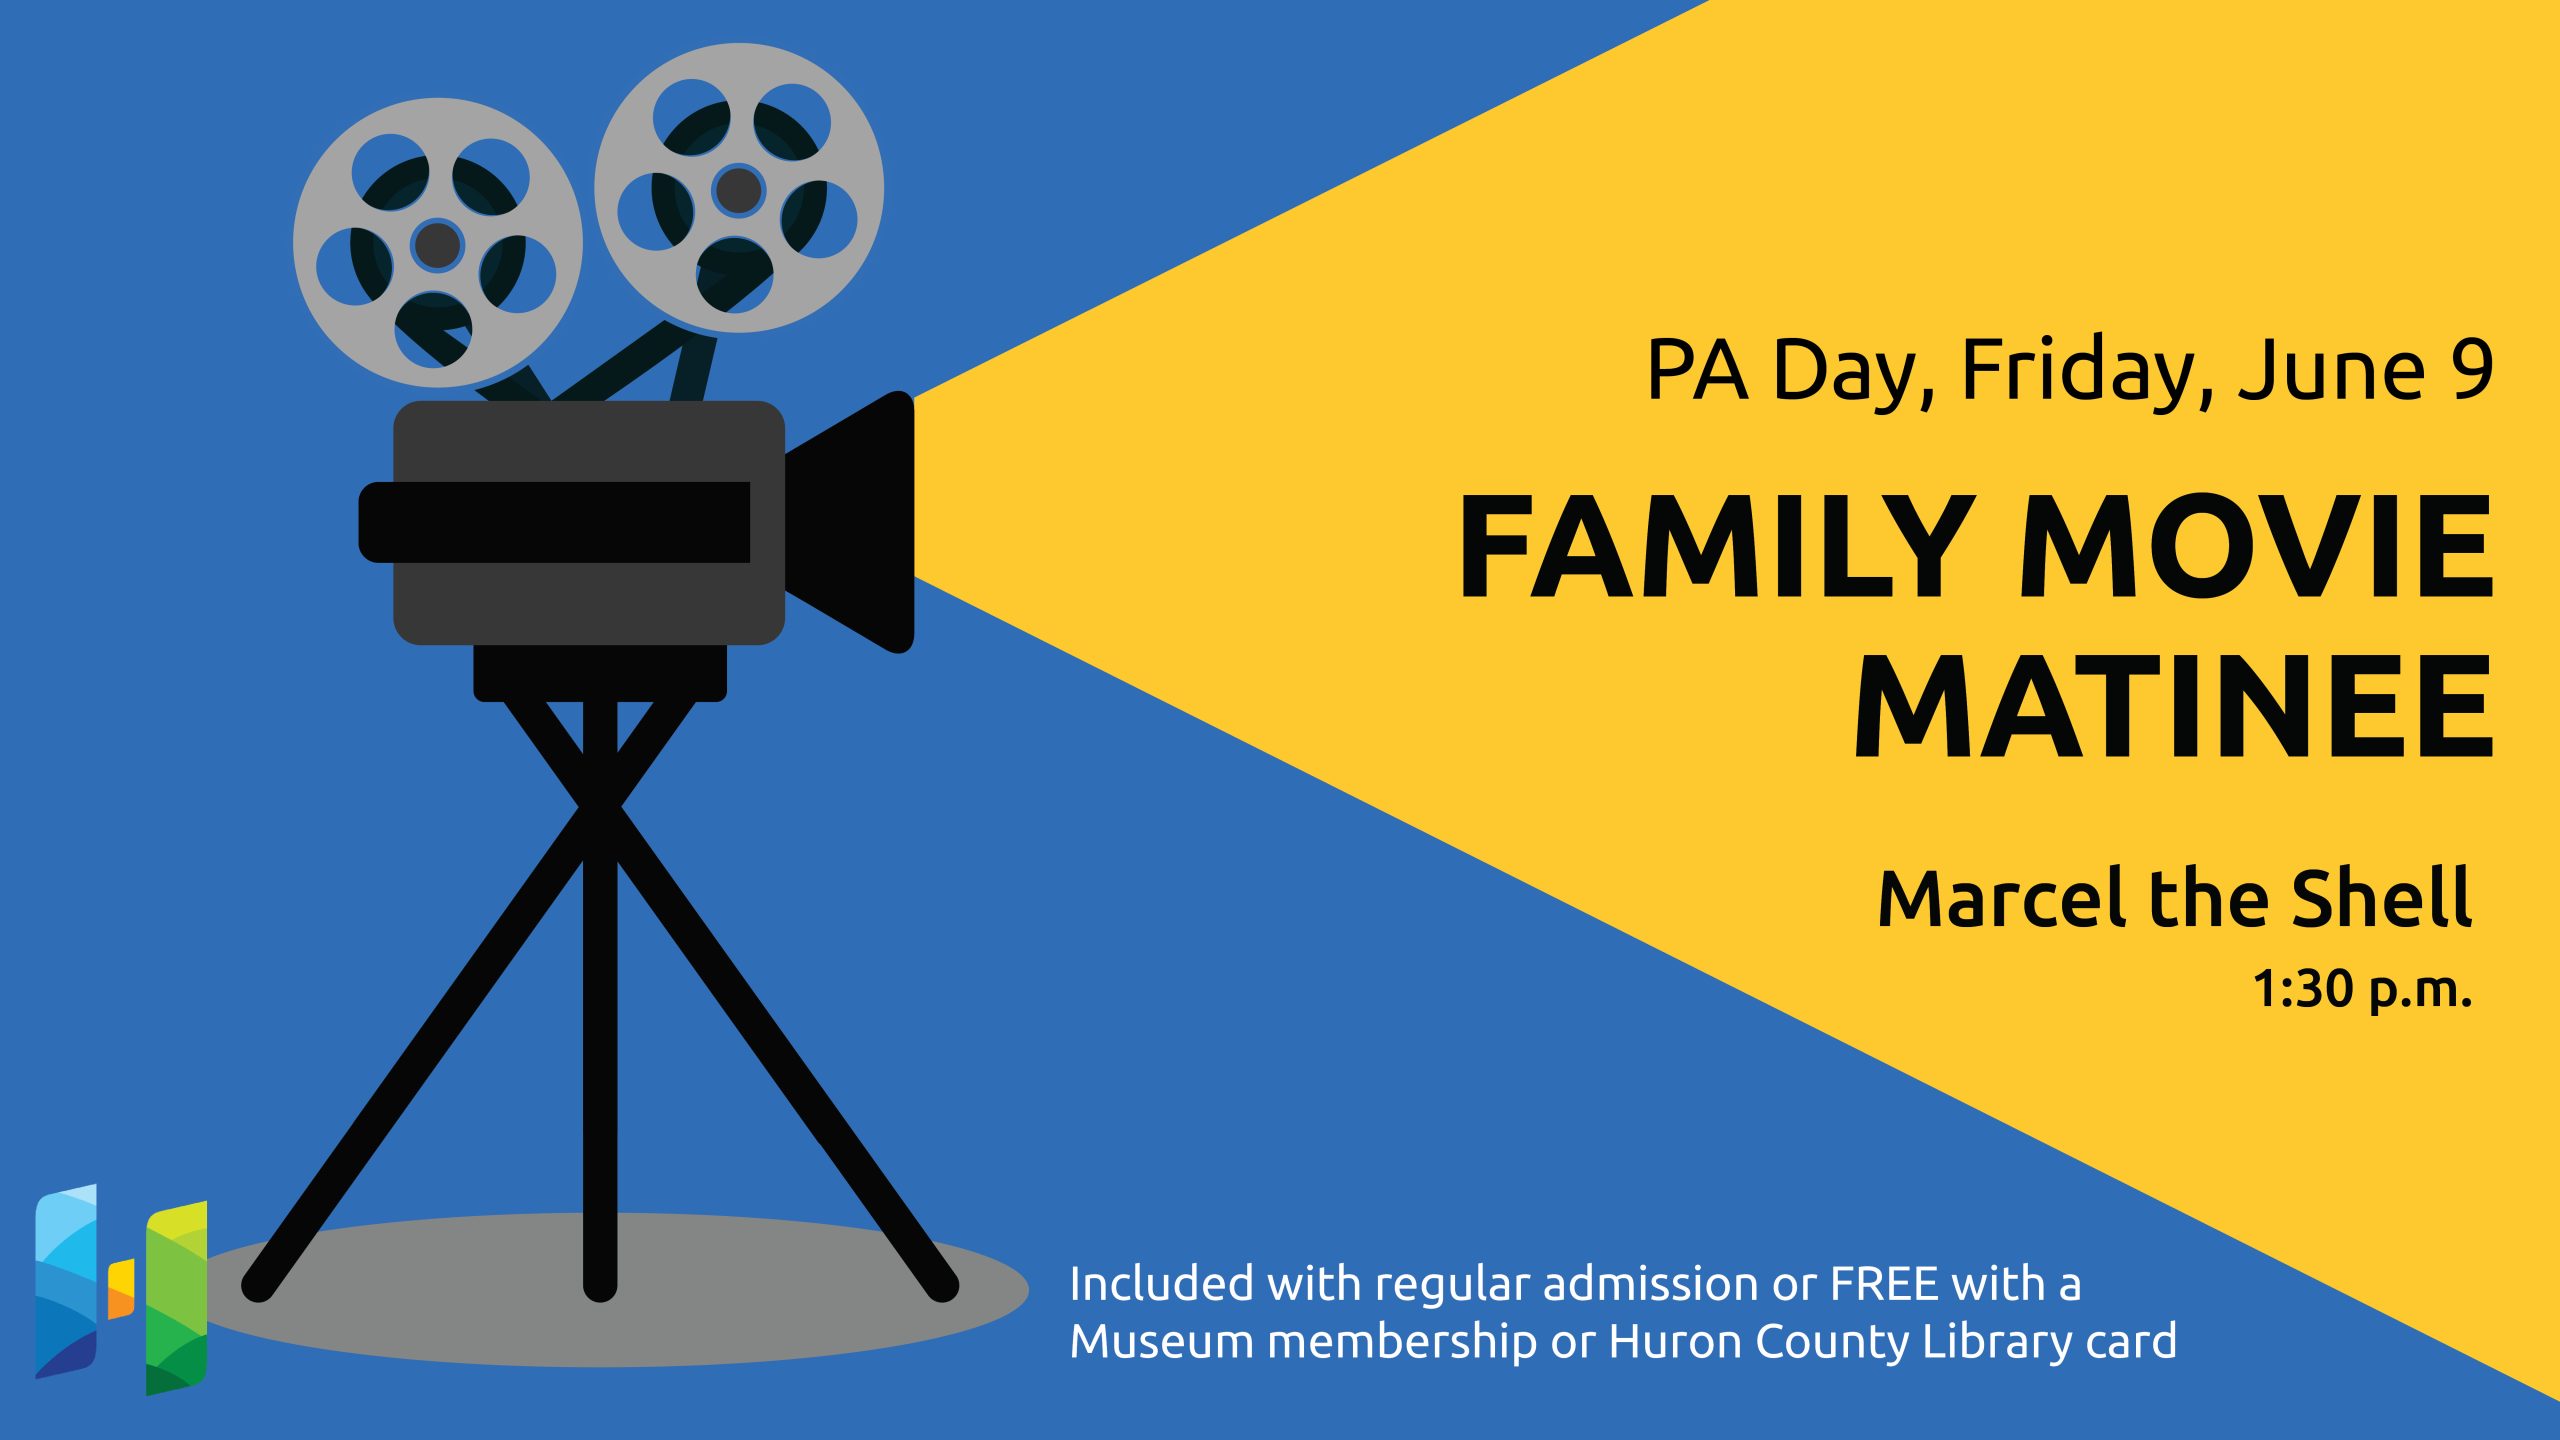 Illustration of a film projector with text promoting PA Day family movie at the museum